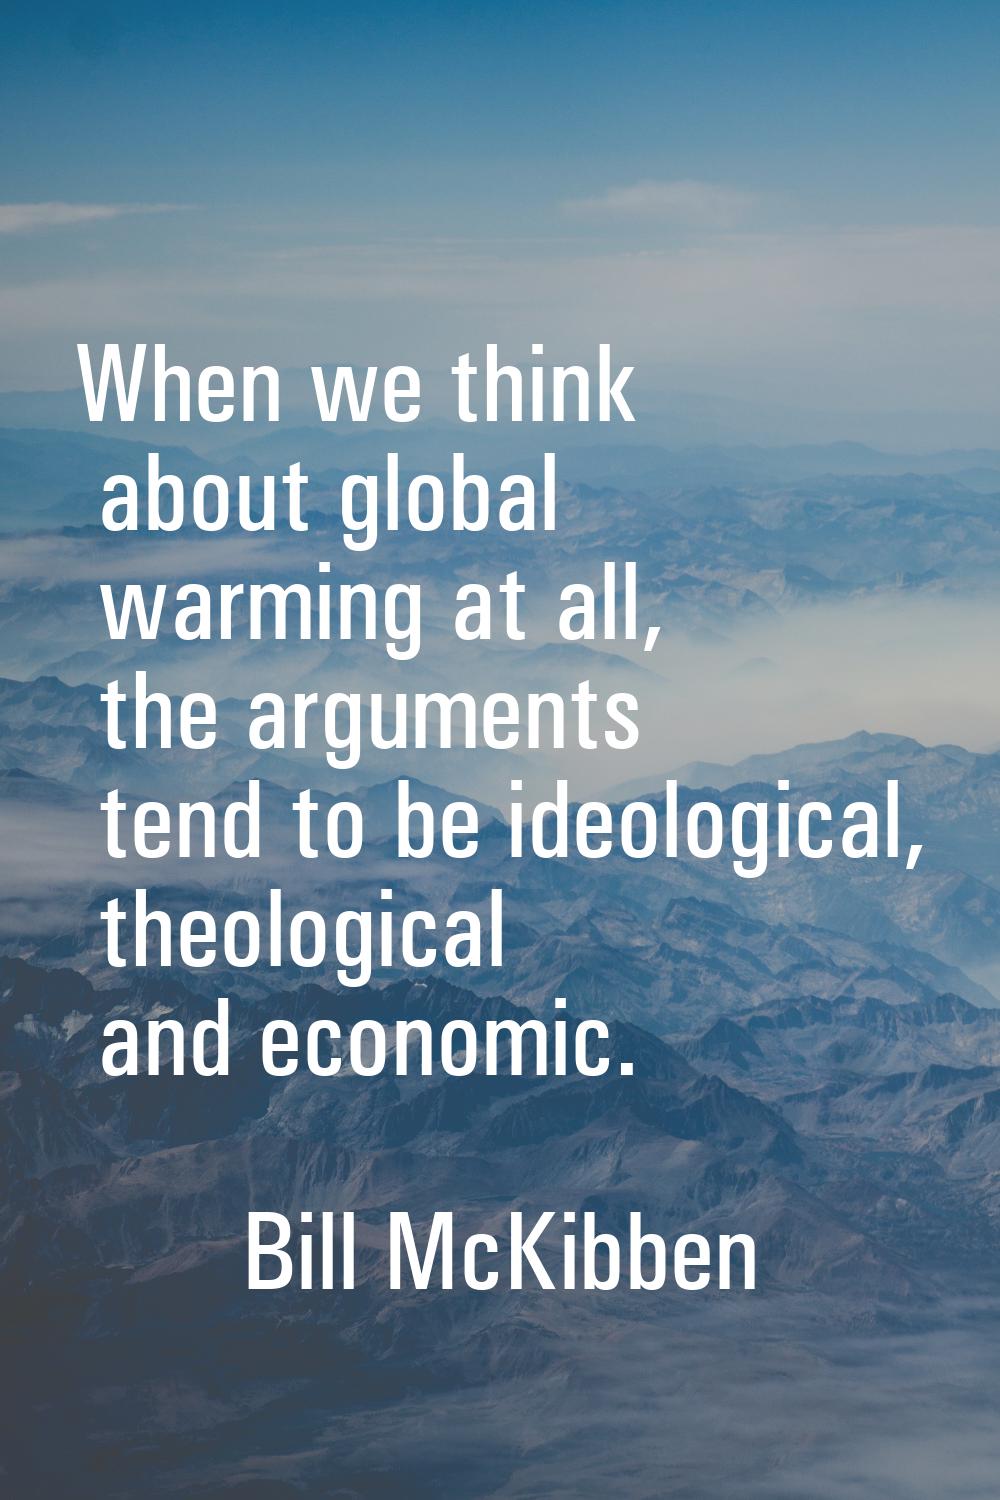 When we think about global warming at all, the arguments tend to be ideological, theological and ec